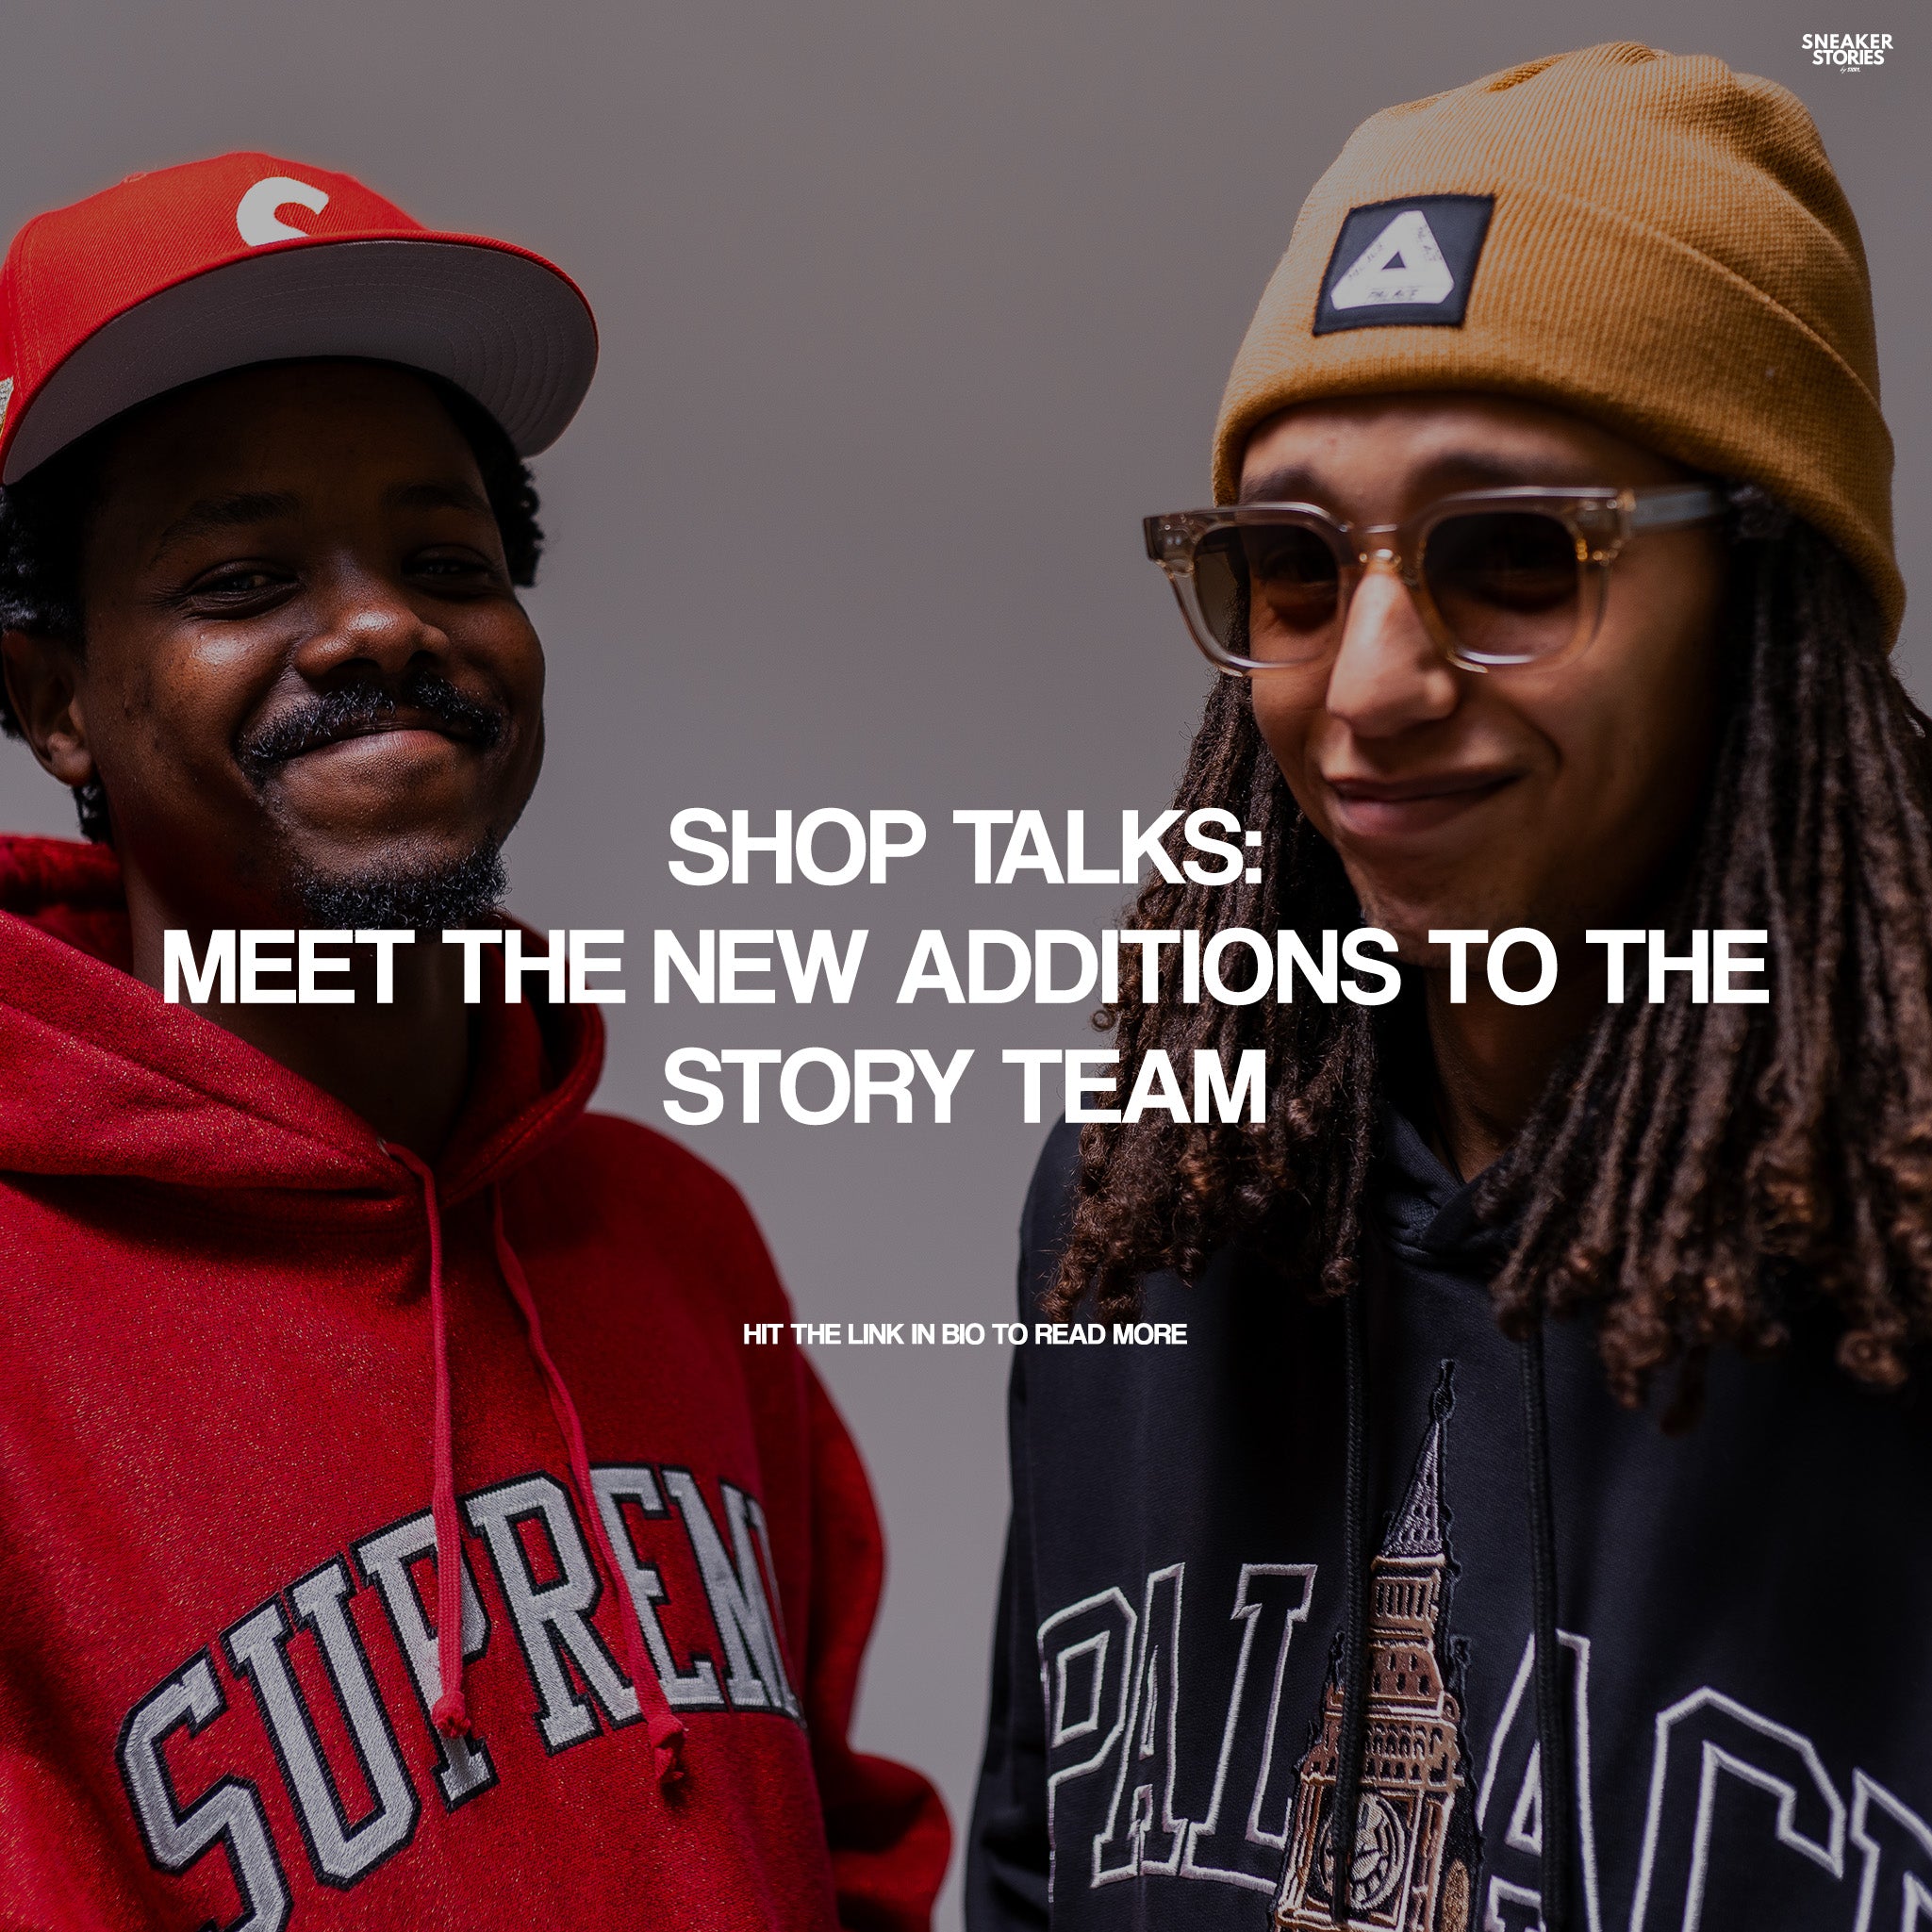 Shop Talks: Meet the new additions to the Story team